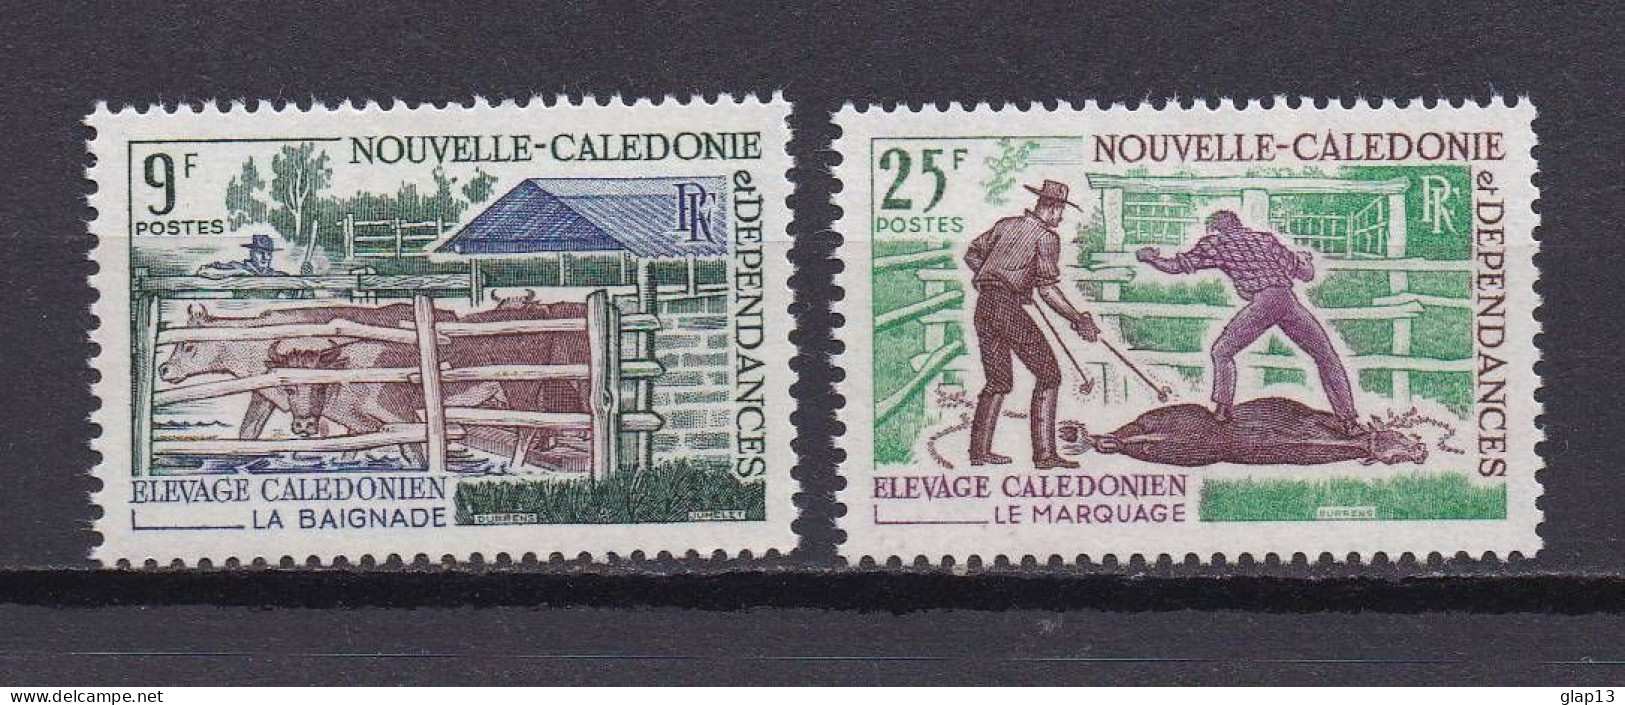 NOUVELLE-CALEDONIE 1969 TIMBRE N°356/57 NEUF** ELEVAGE - Unused Stamps